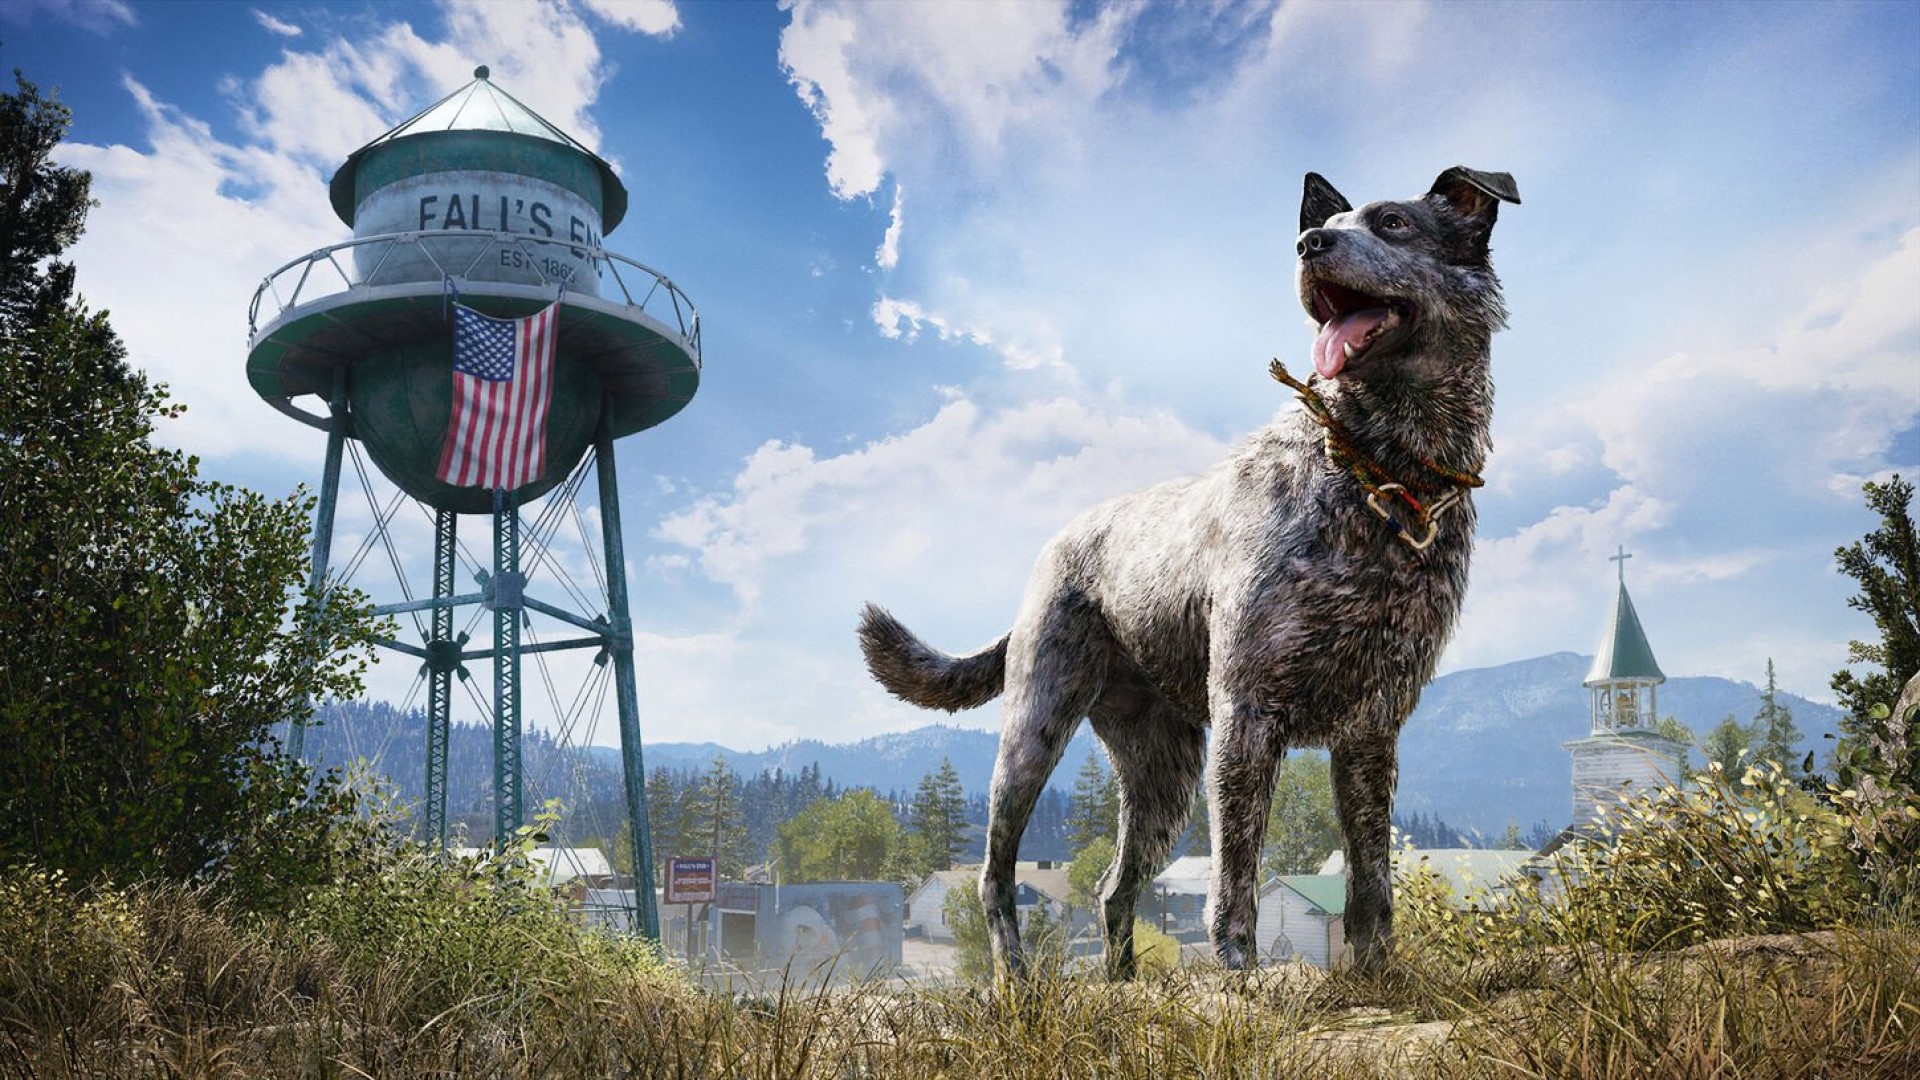 Far Cry 5 is free to play this weekend